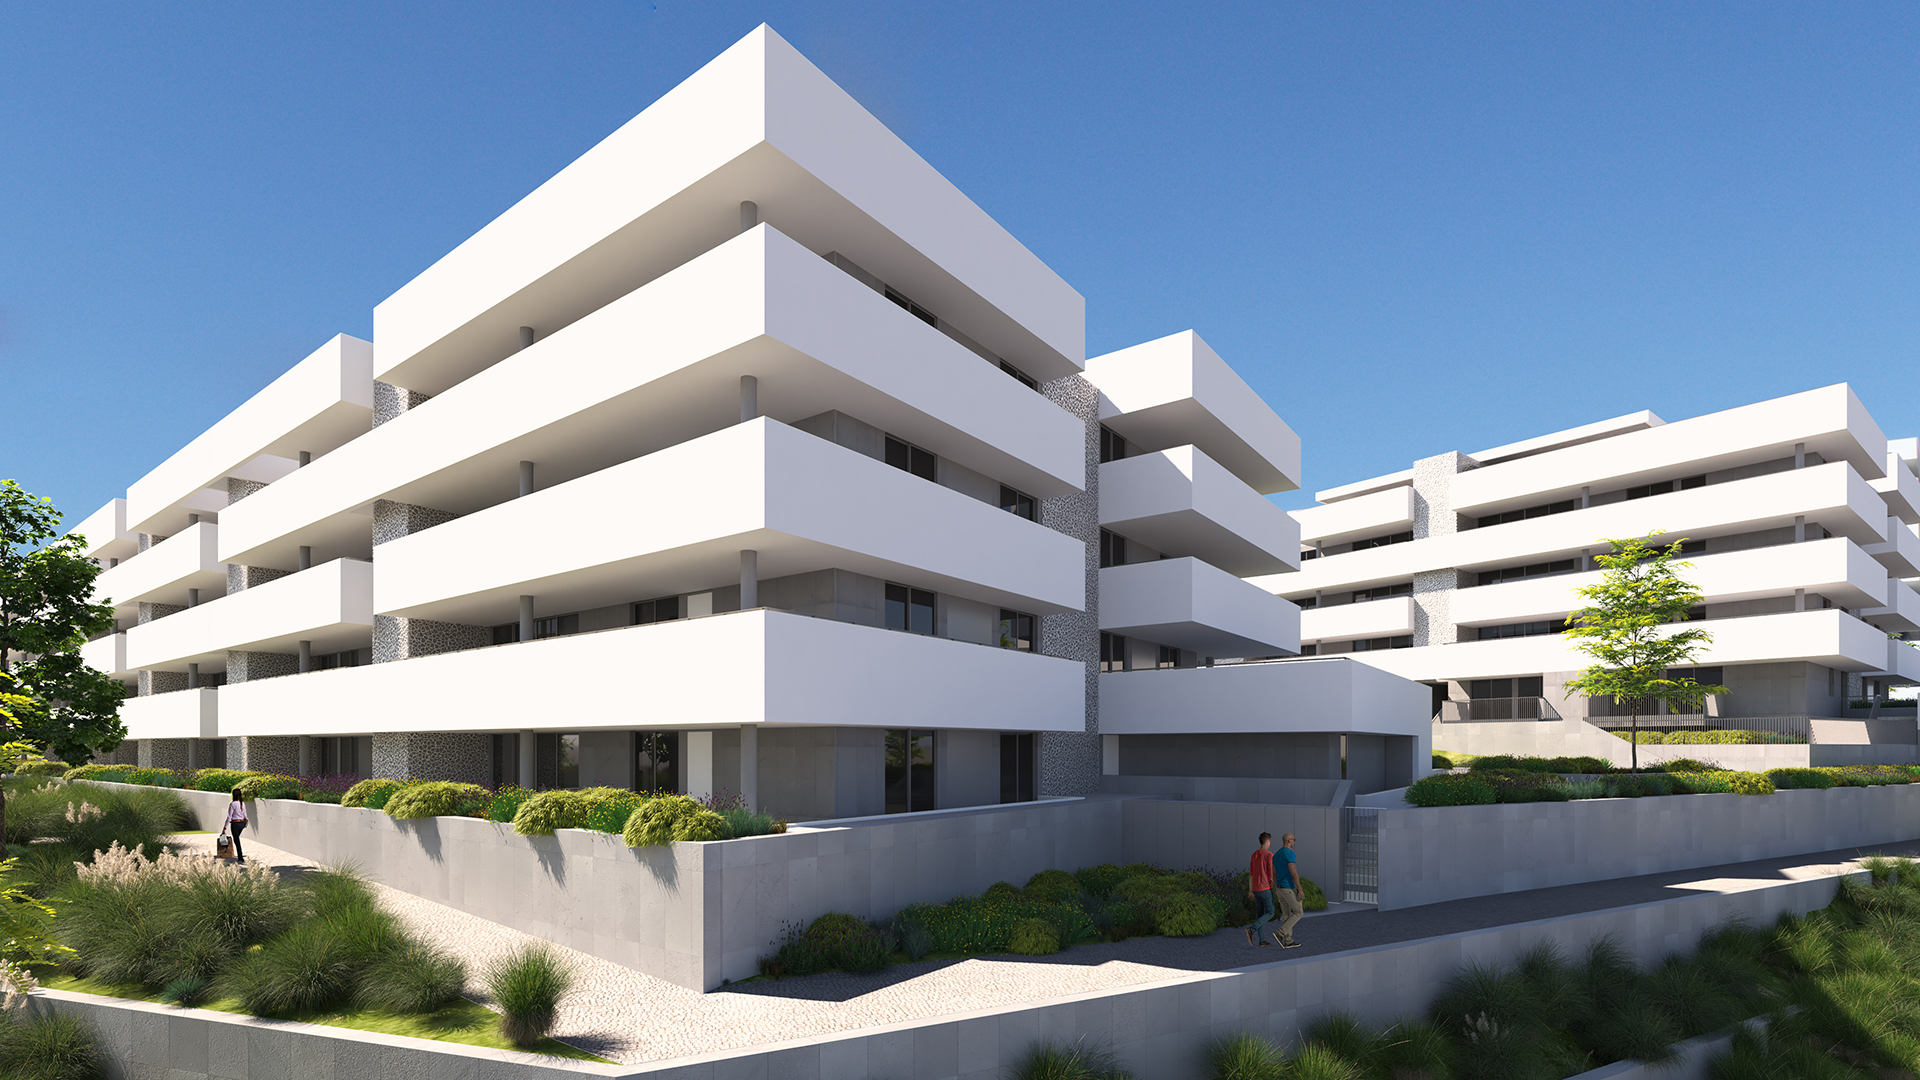 3 Bedroom apartments with communal pool, spa and sea views, Lagos, West Algarve  | LG1855 Fantastic apartment under construction, some with sea views, only a few minutes away from the old town of Lagos, the marina, the beautiful beaches and the golf course. Owners have access to a communal pool and spa area. 